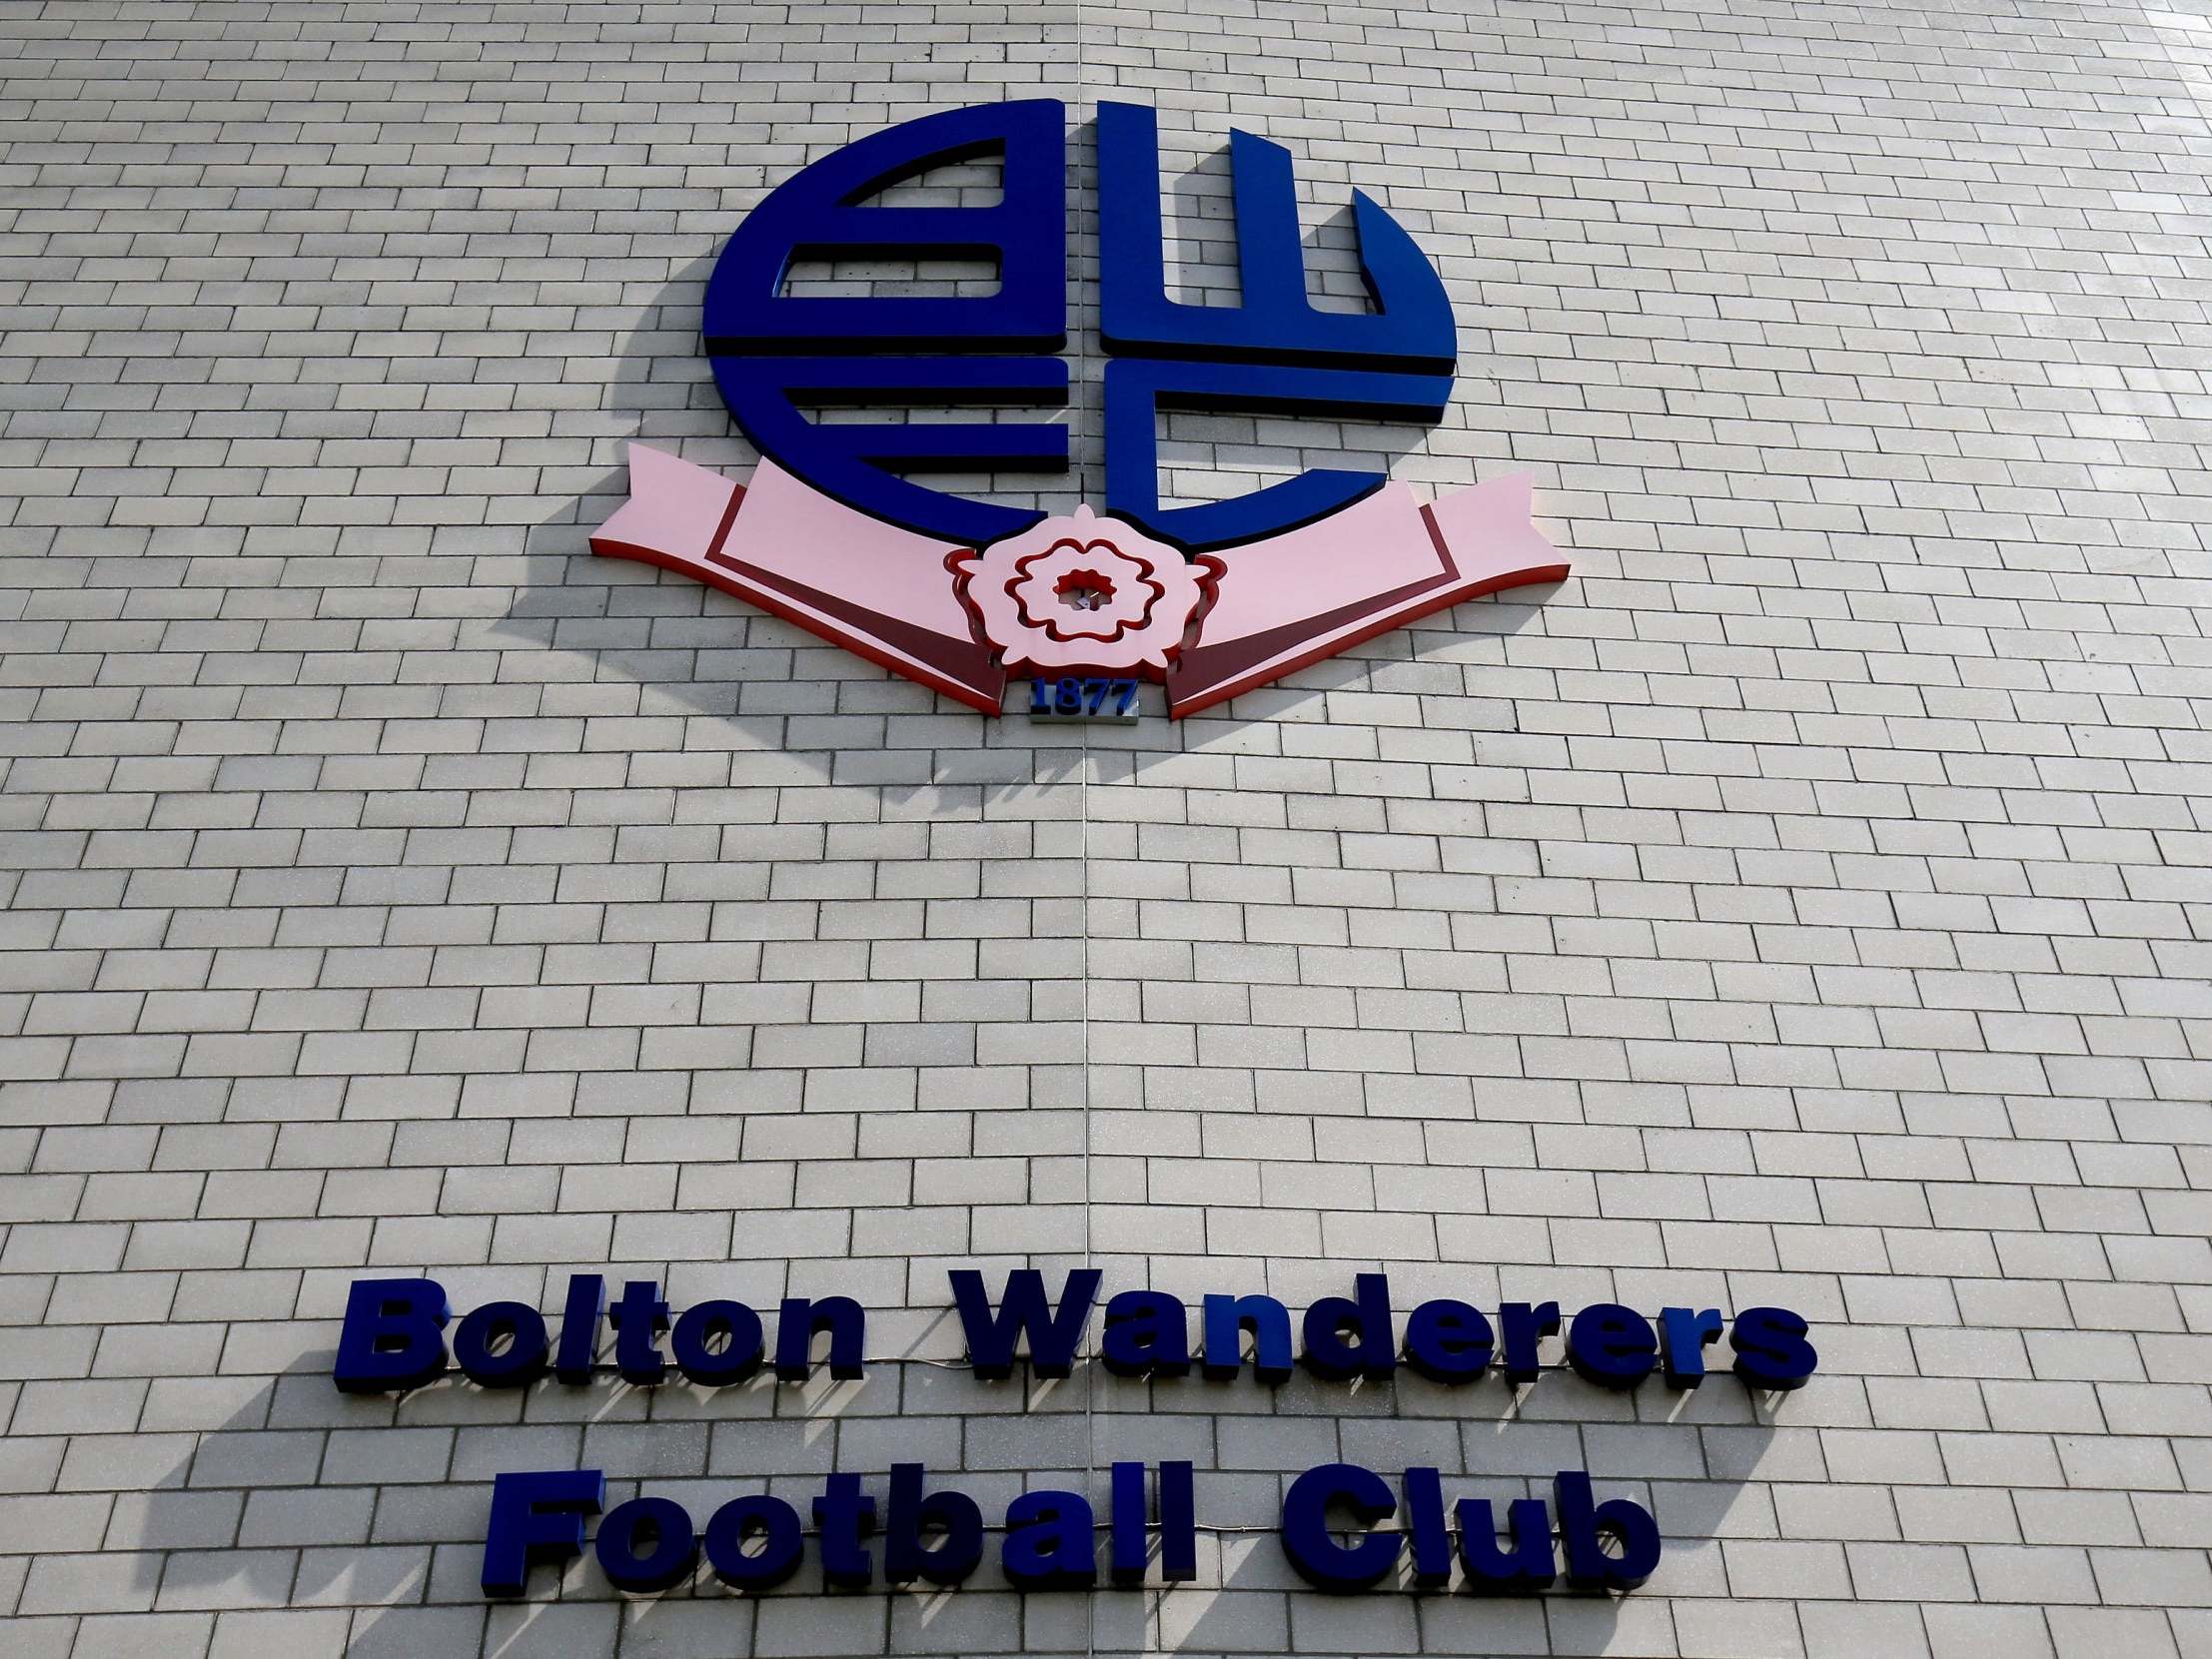 Bolton have until 5pm to find a solution